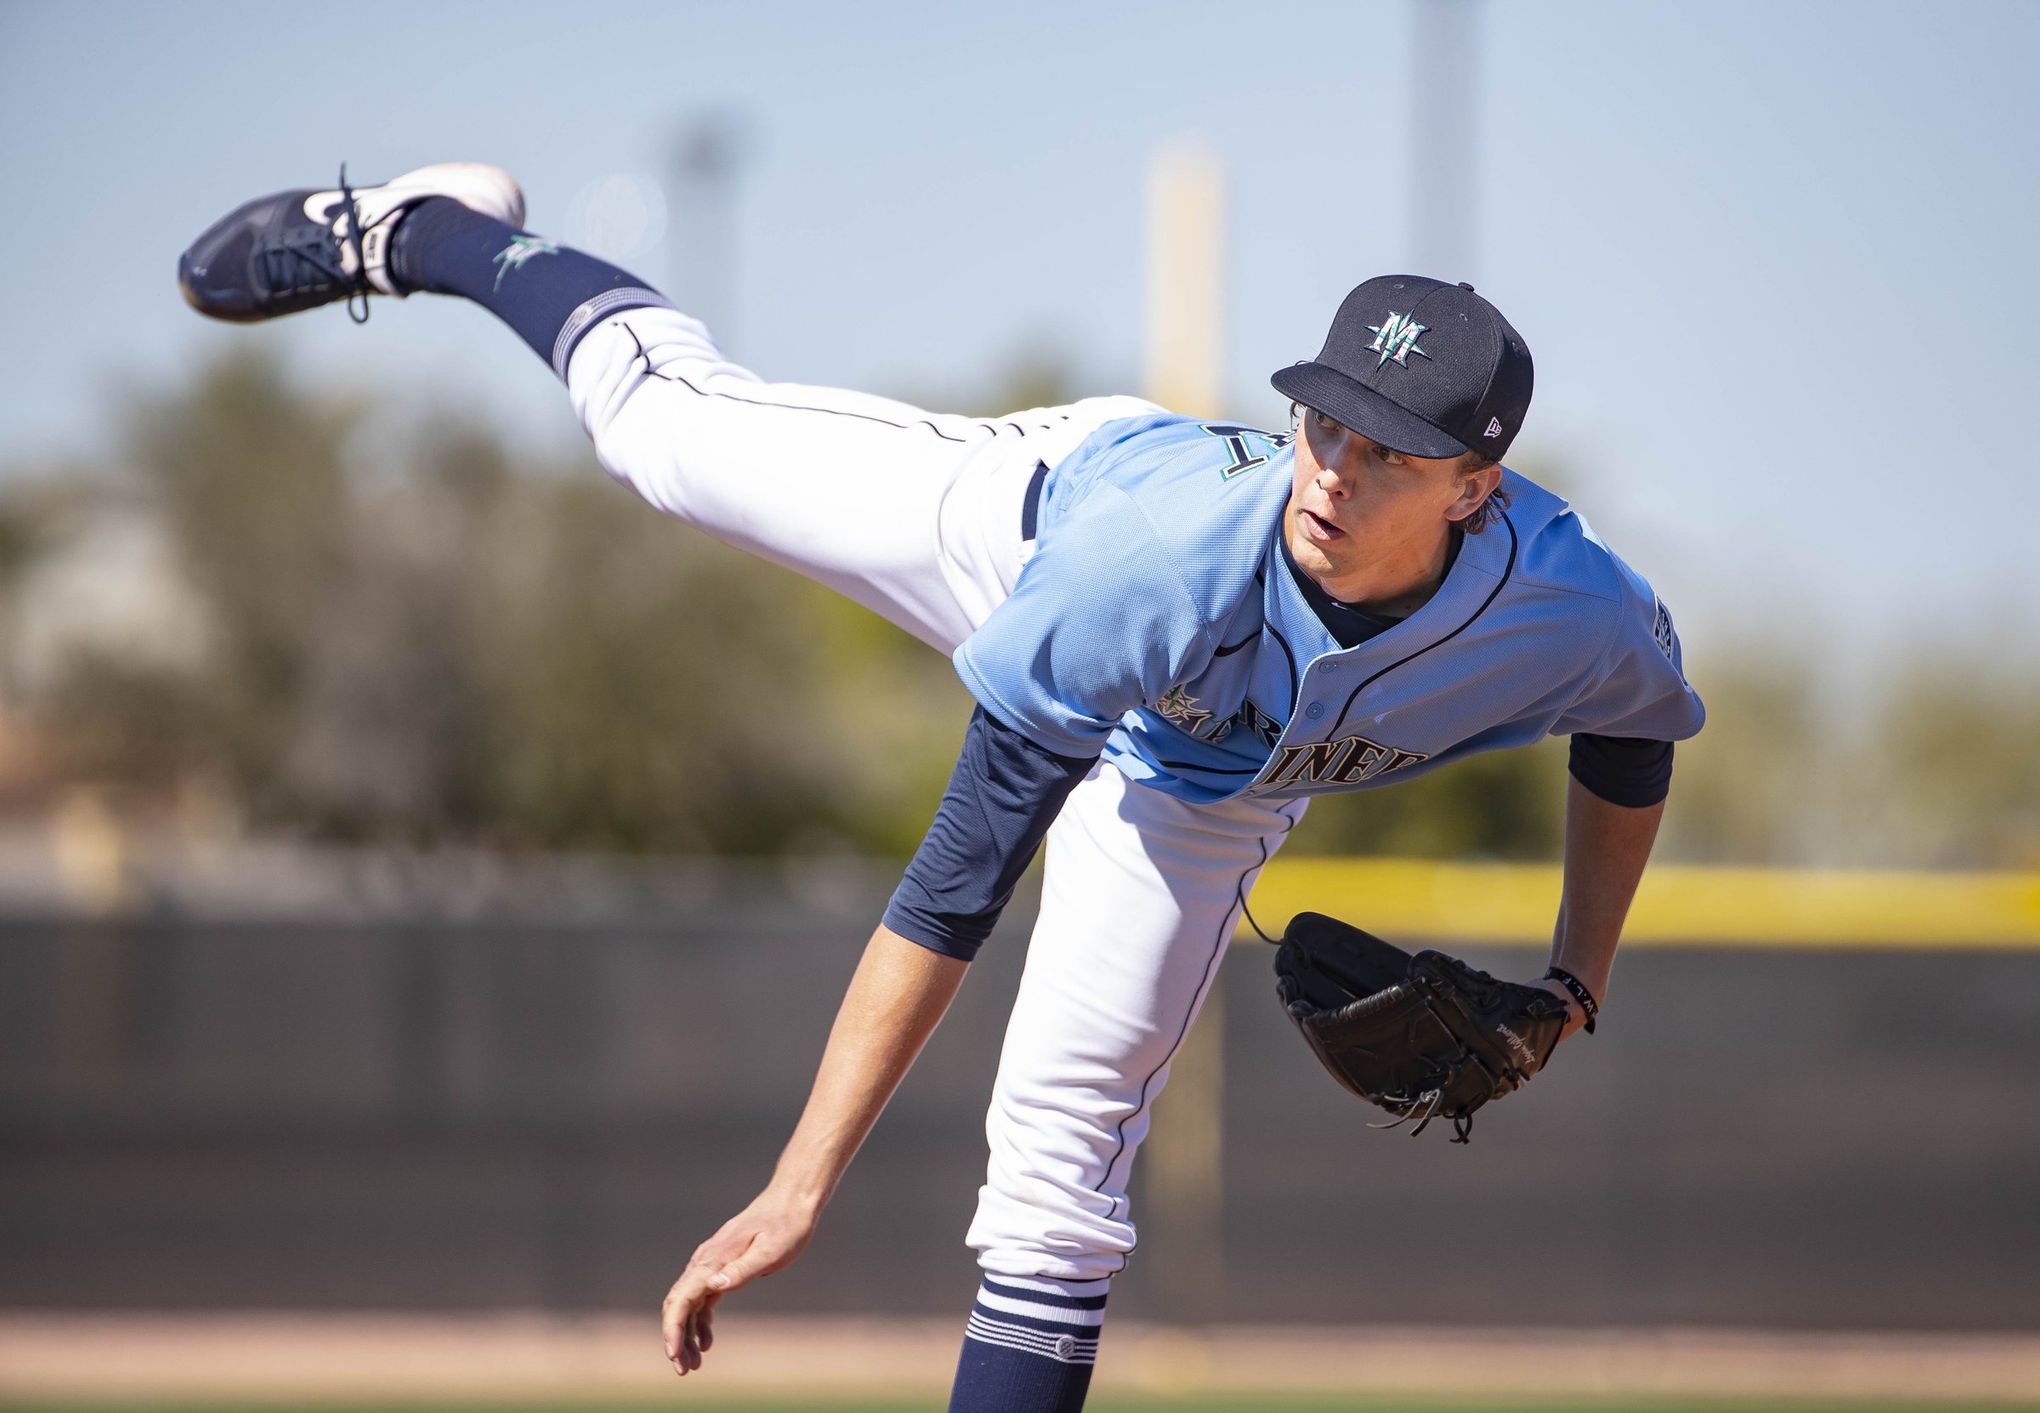 Mariners top pitching prospect Logan Gilbert impresses in spring